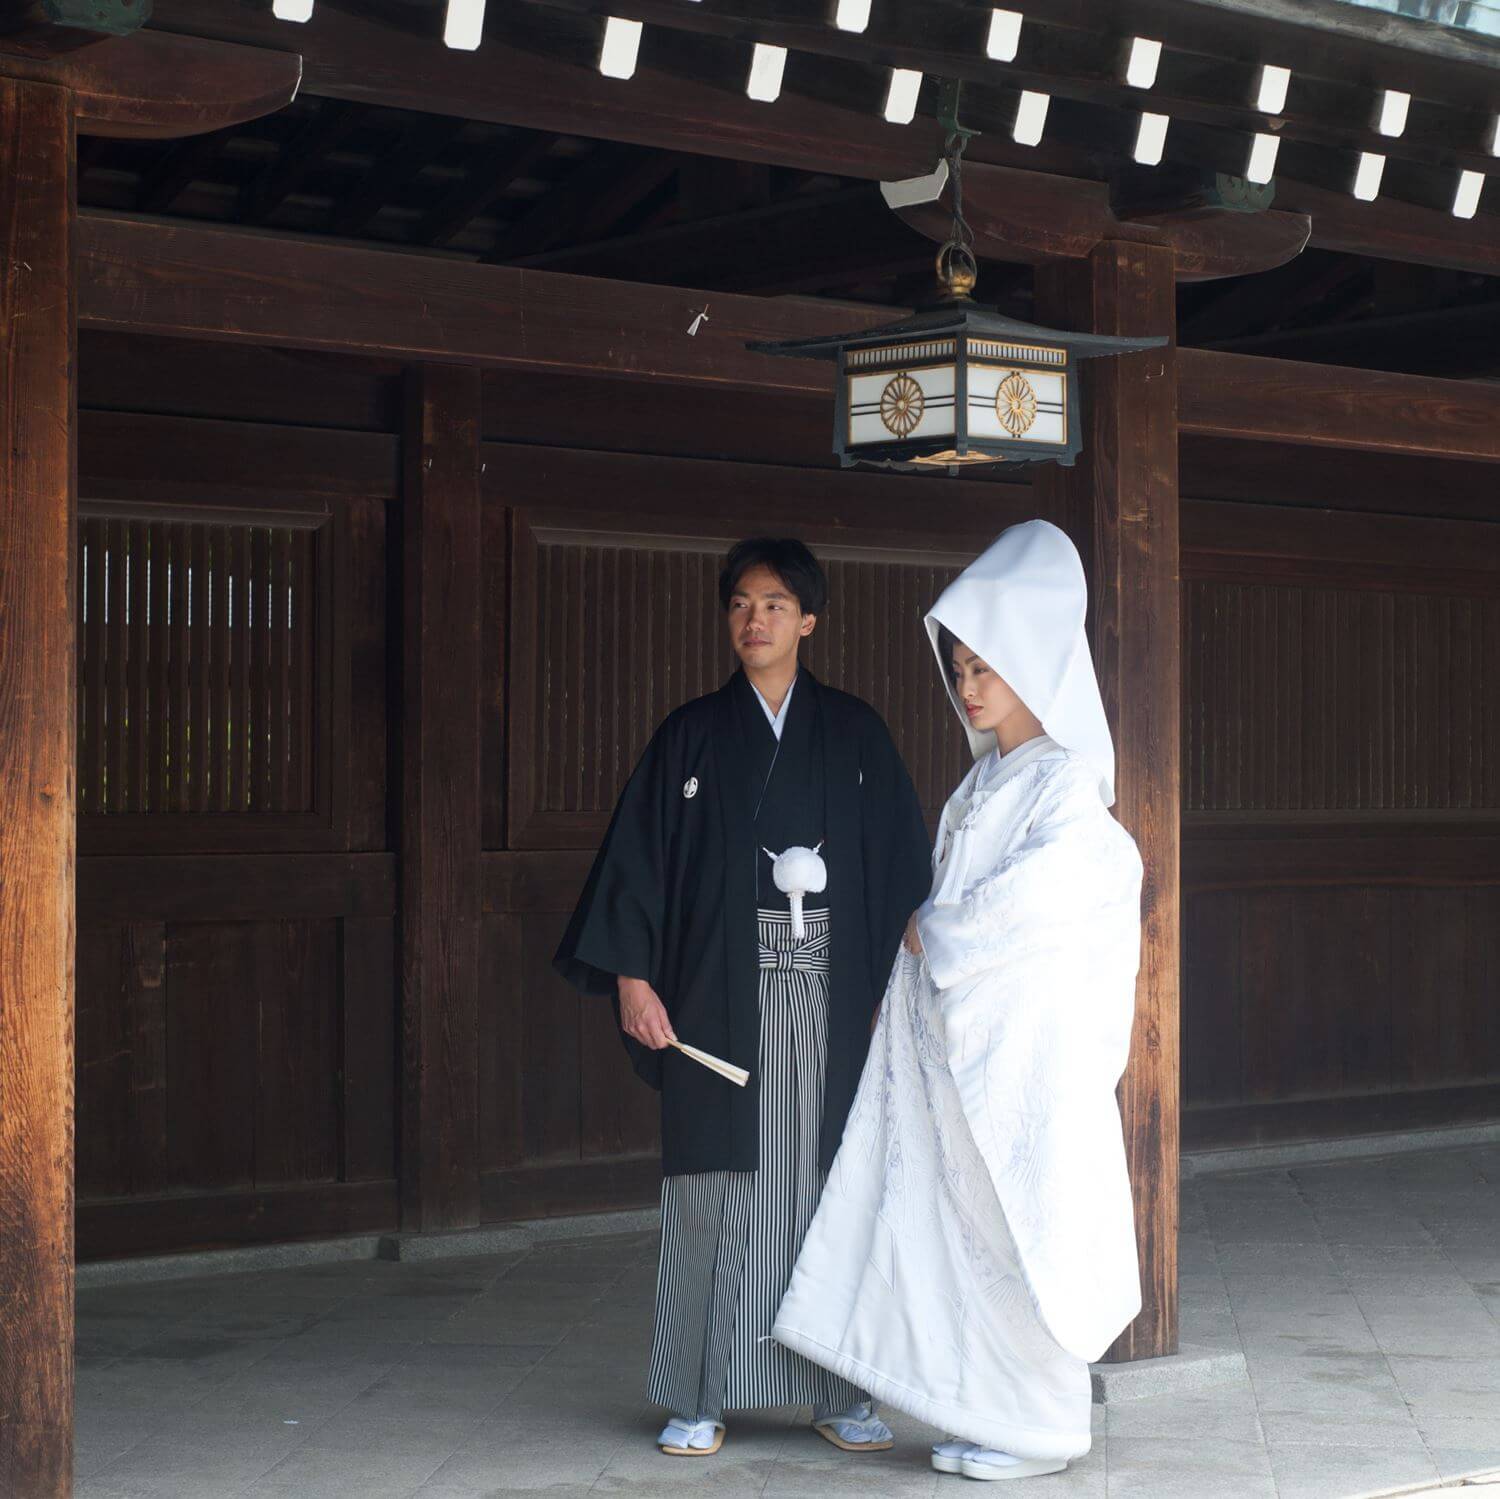  A couple at their traditional Japanese wedding ceremony at Meiji Jingu shrine in Tokyo = Shutterstock